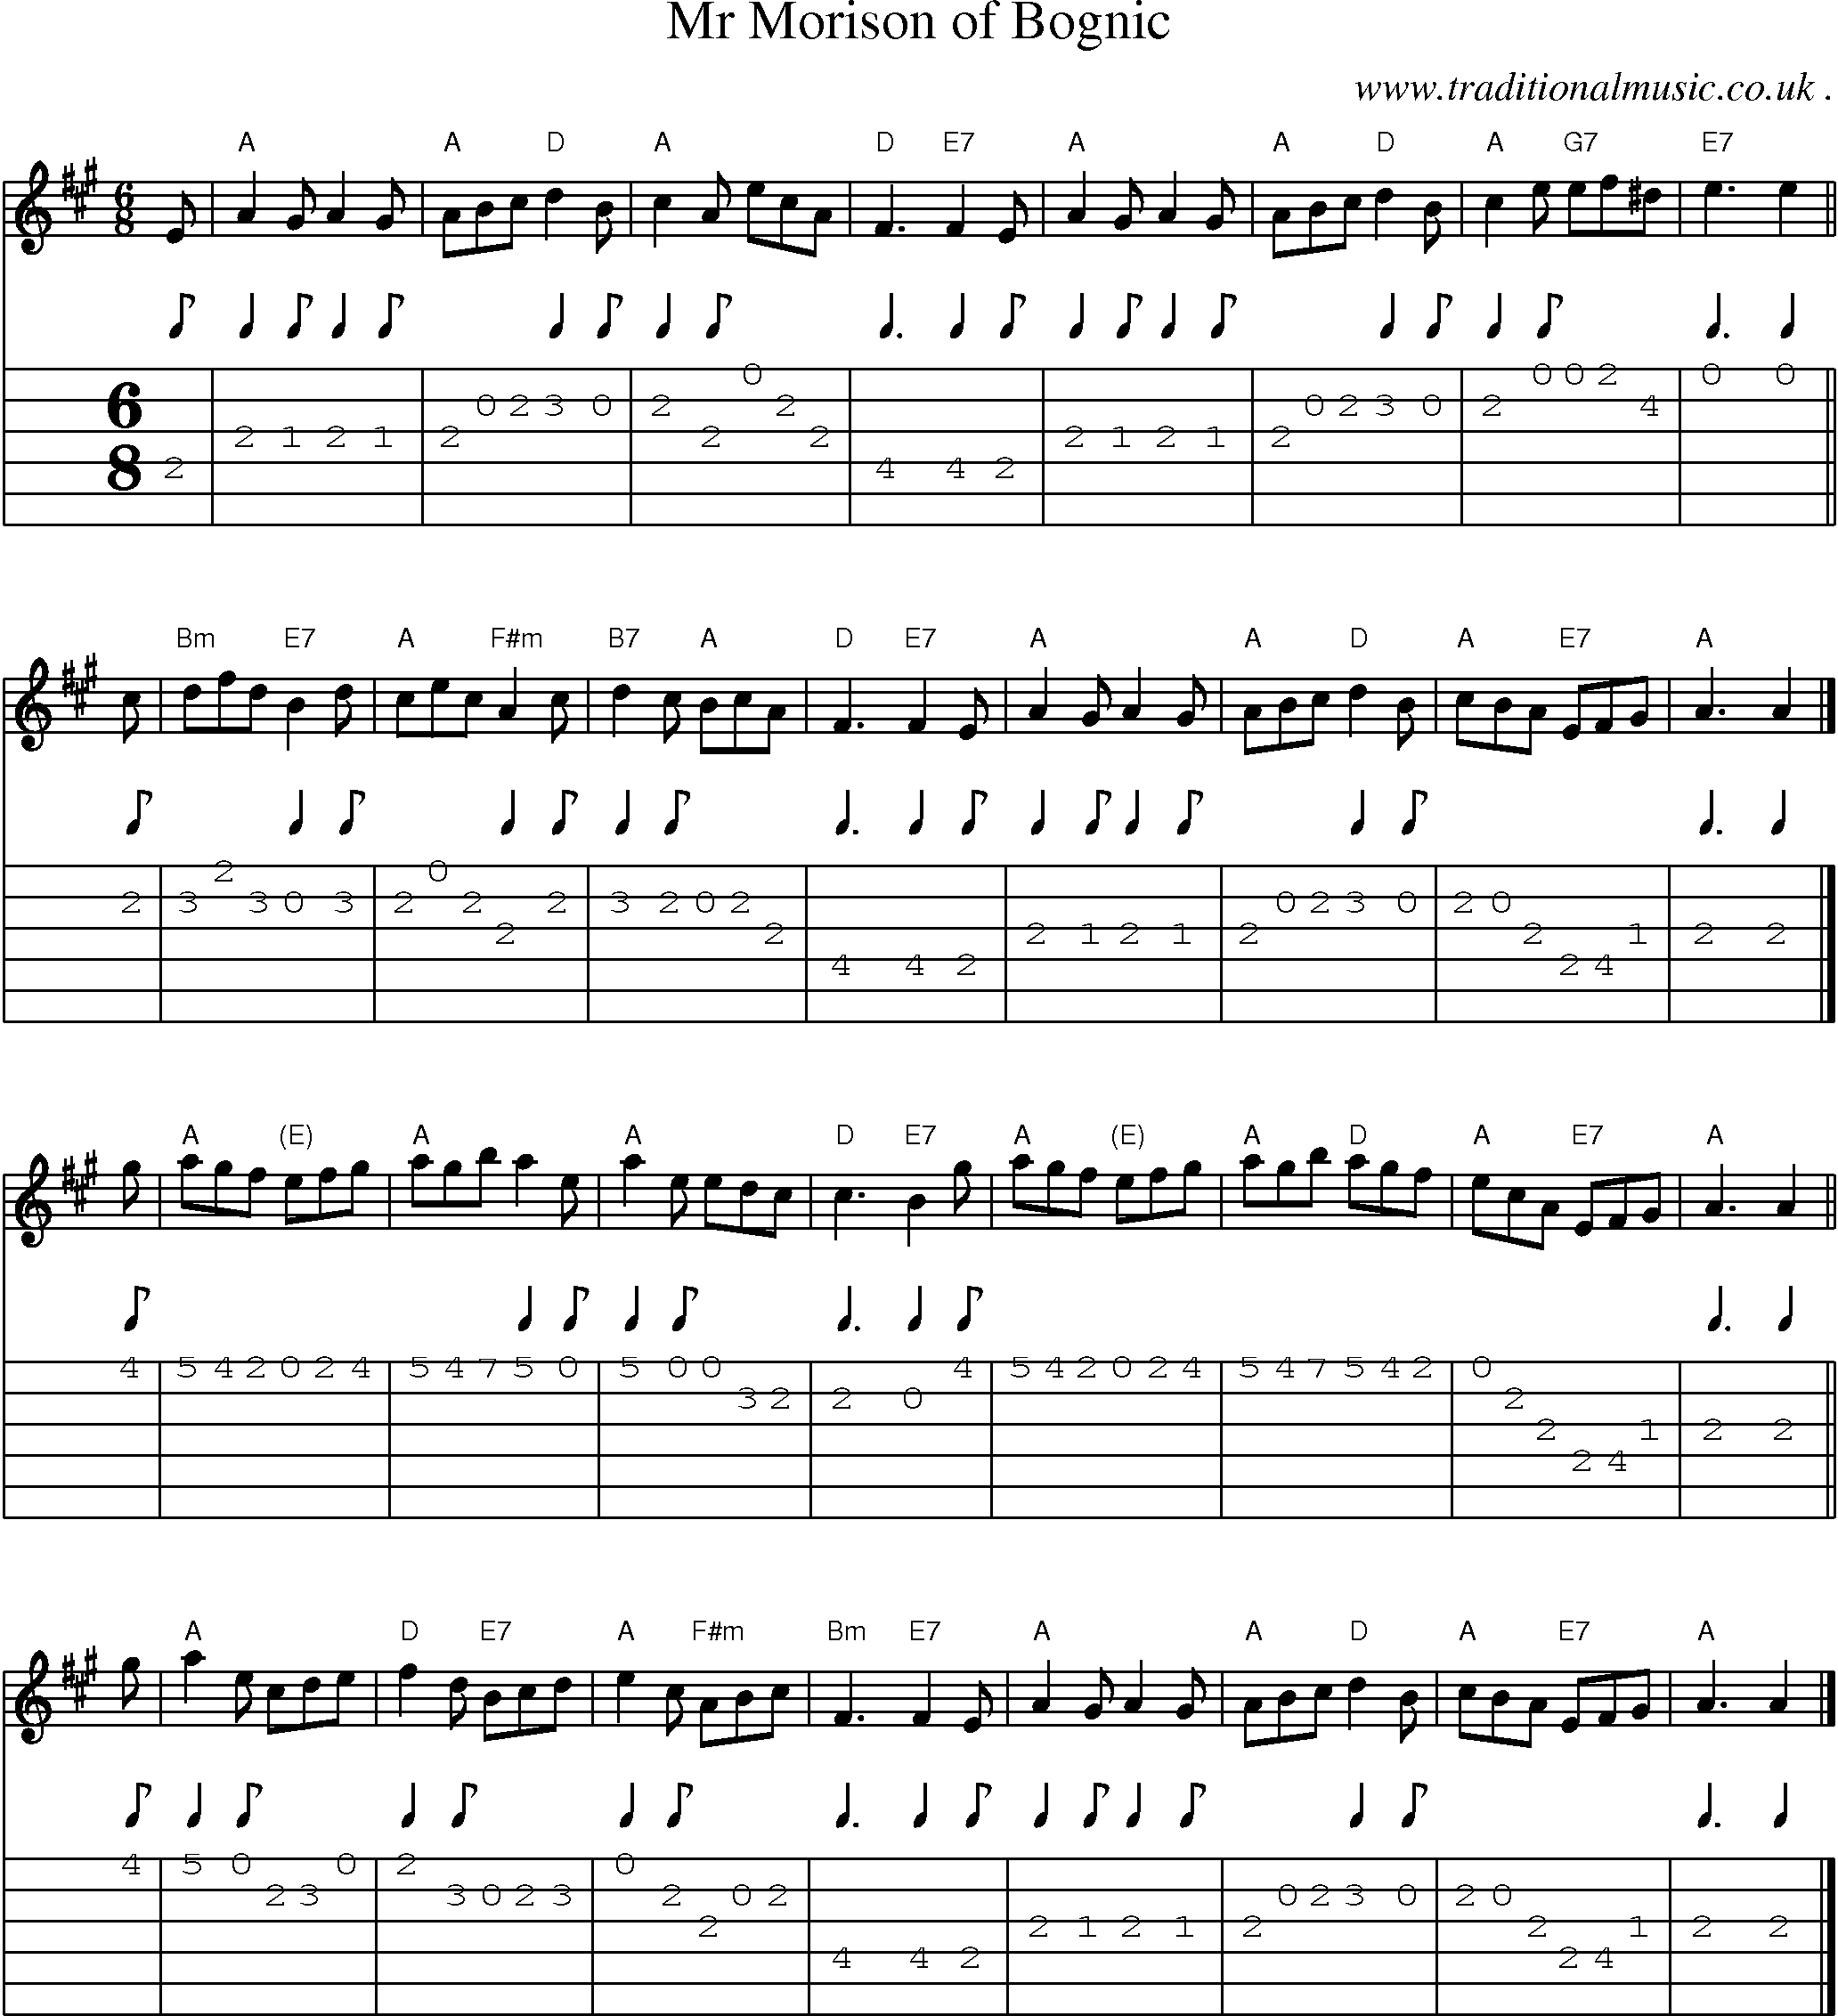 Sheet-music  score, Chords and Guitar Tabs for Mr Morison Of Bognic